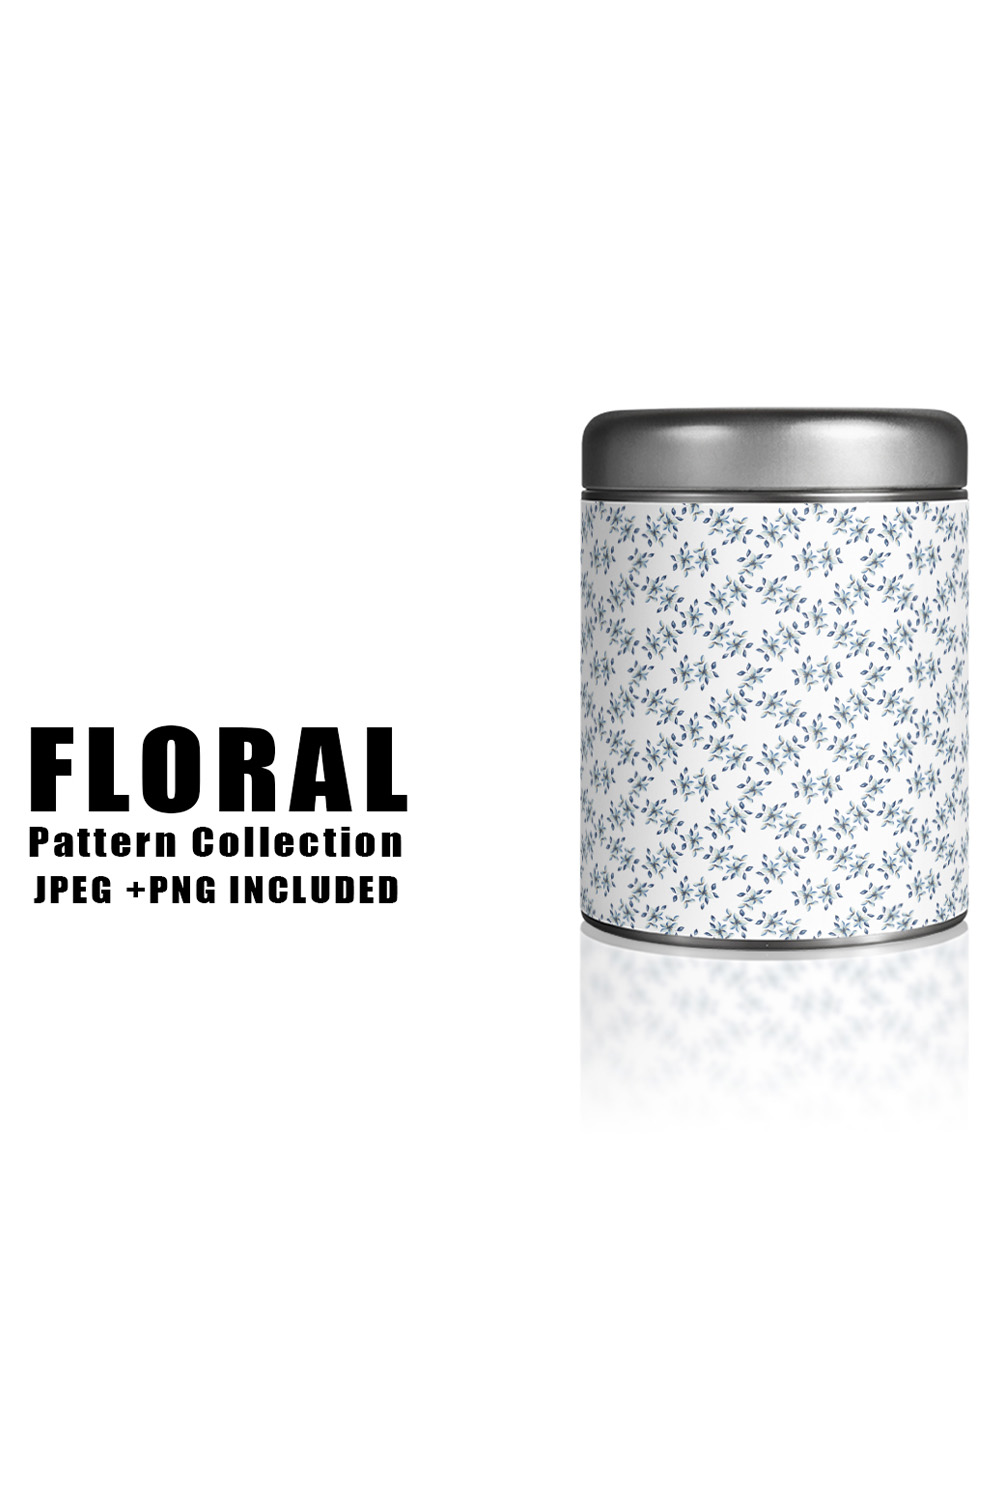 Image of a jar with wonderful patterns of flowers